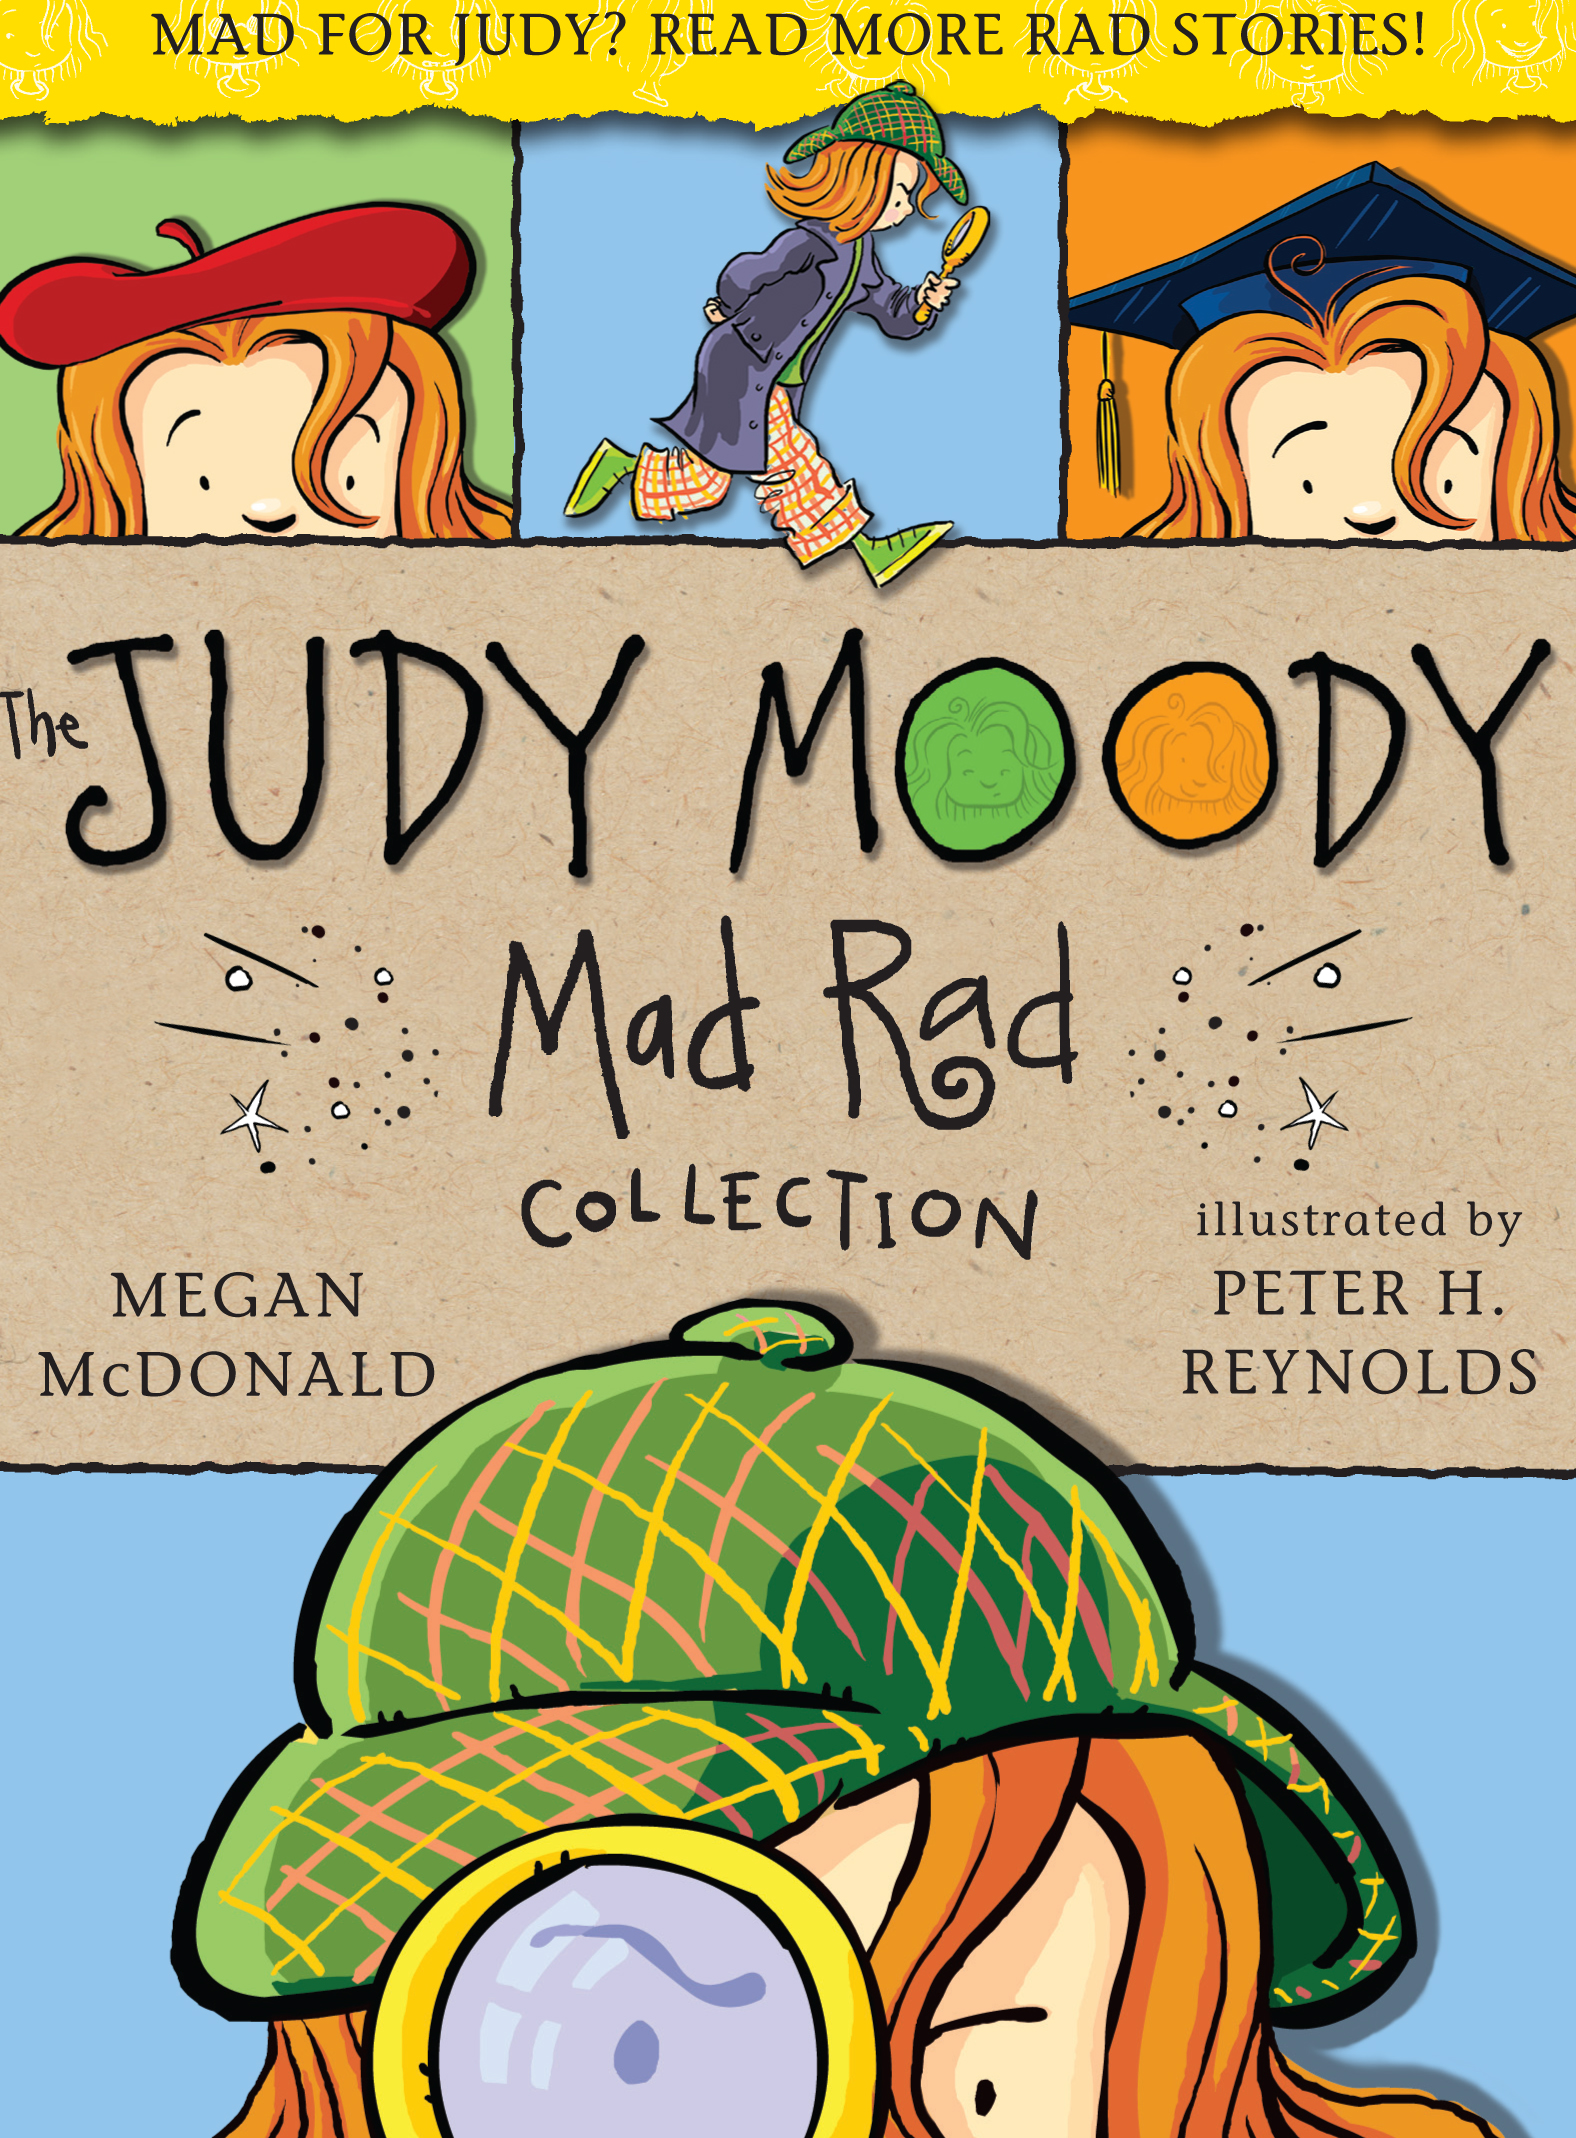 Judy-Moody-The-Mad-Rad-Collection